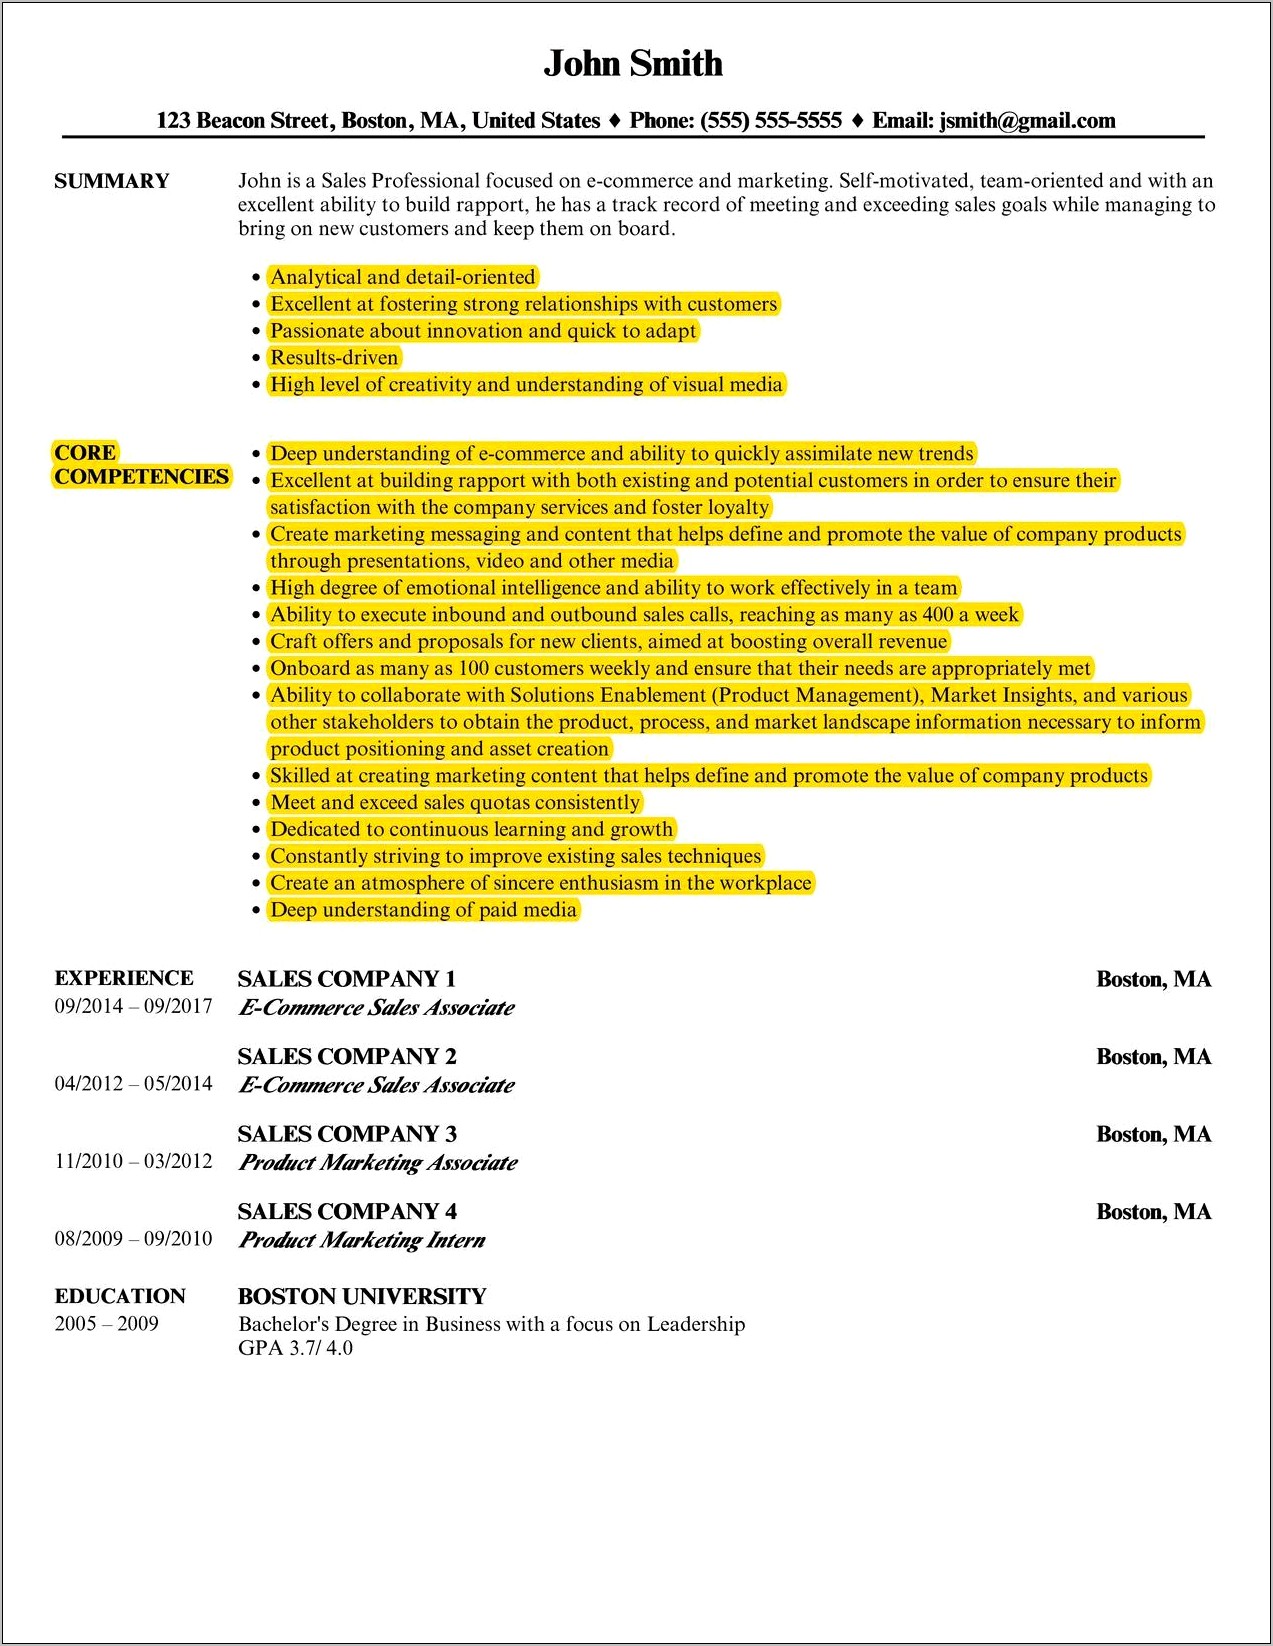 A Functional Resume Is Best For